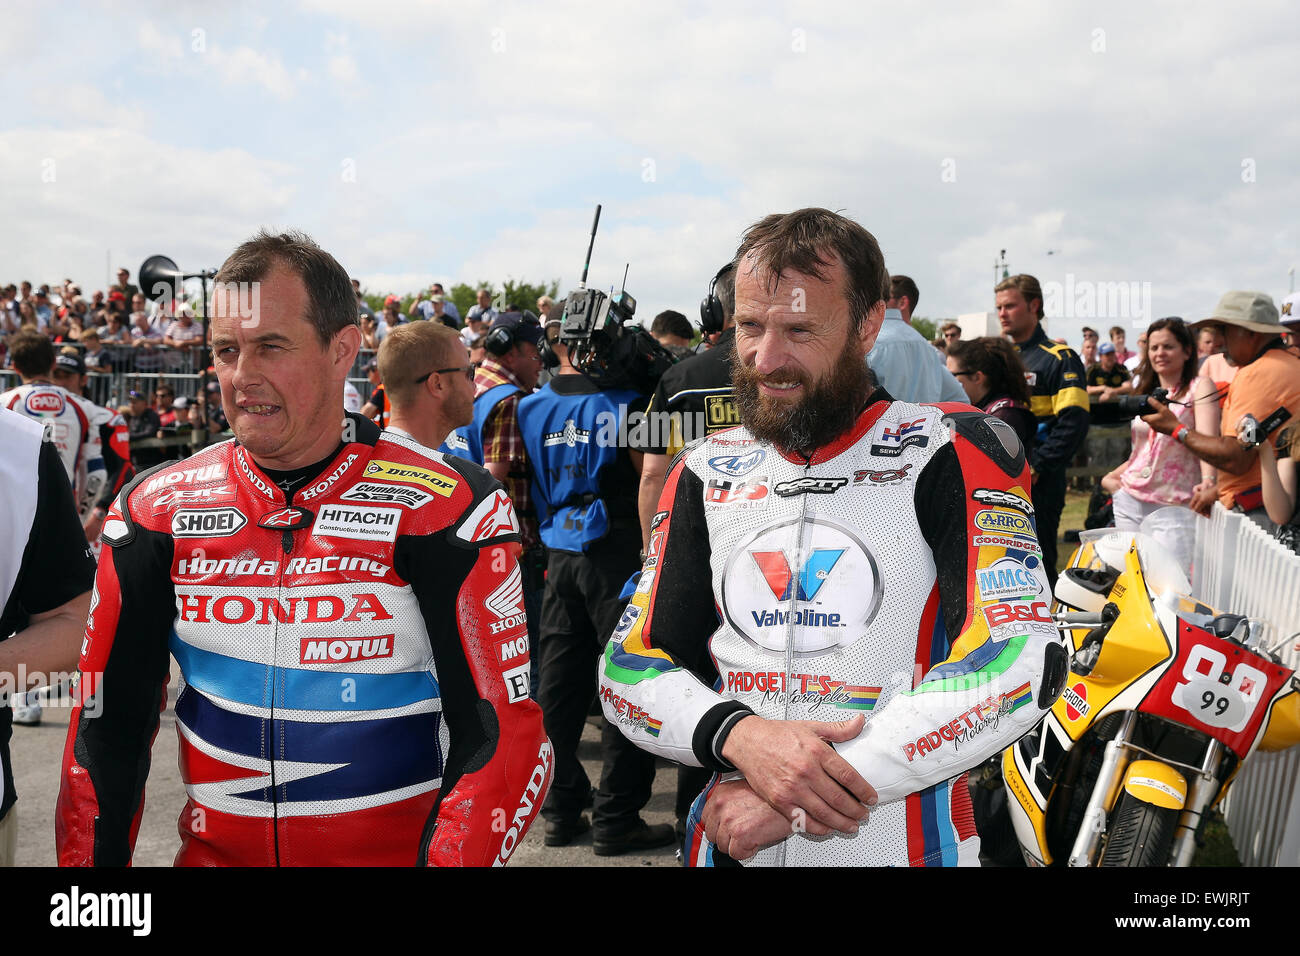 Goodwood West Sussex, UK . 27th June, 2015. John McGuinness and Bruce Ansty, Isle of Man TT riders, Goodwood, UK, 27th June 2015 Credit:  Rally-Pics.com/Alamy Live News Stock Photo